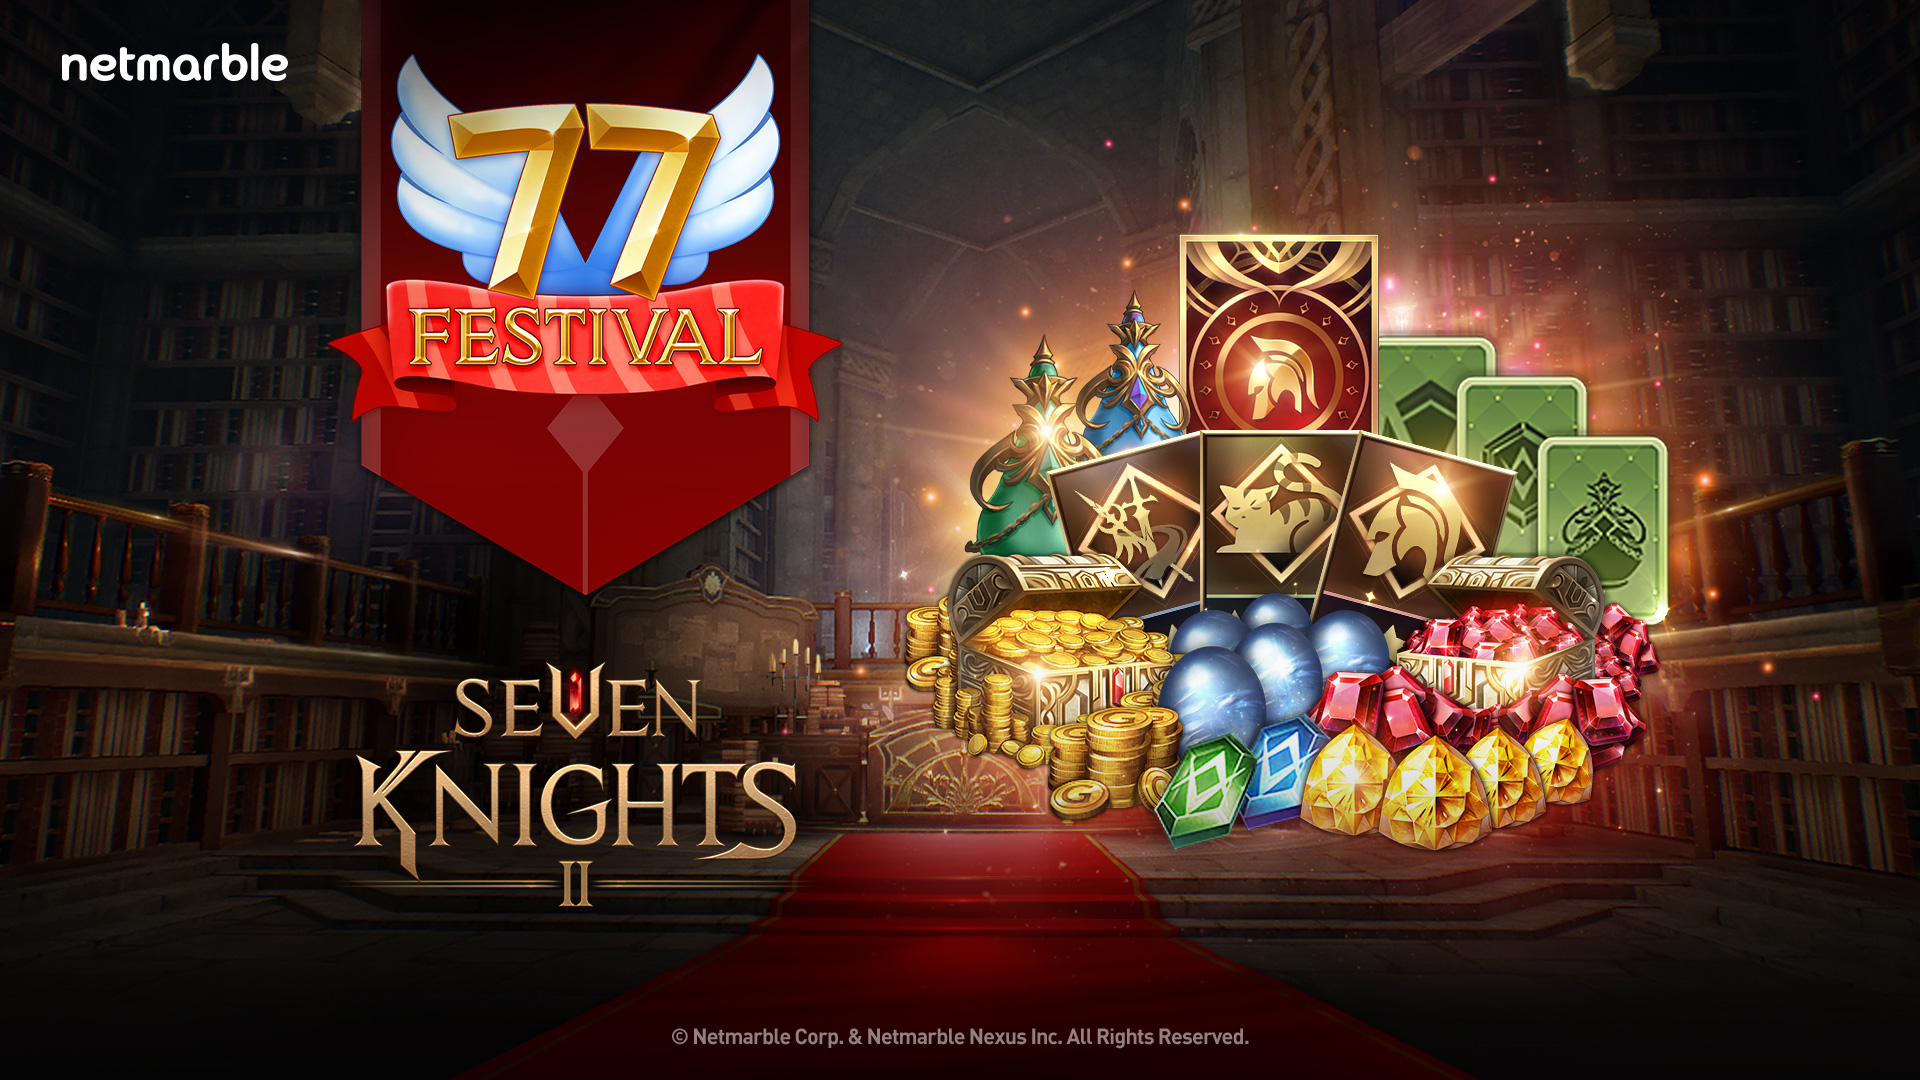 Promotional image showing the various rewards available during the 77 Festival. 